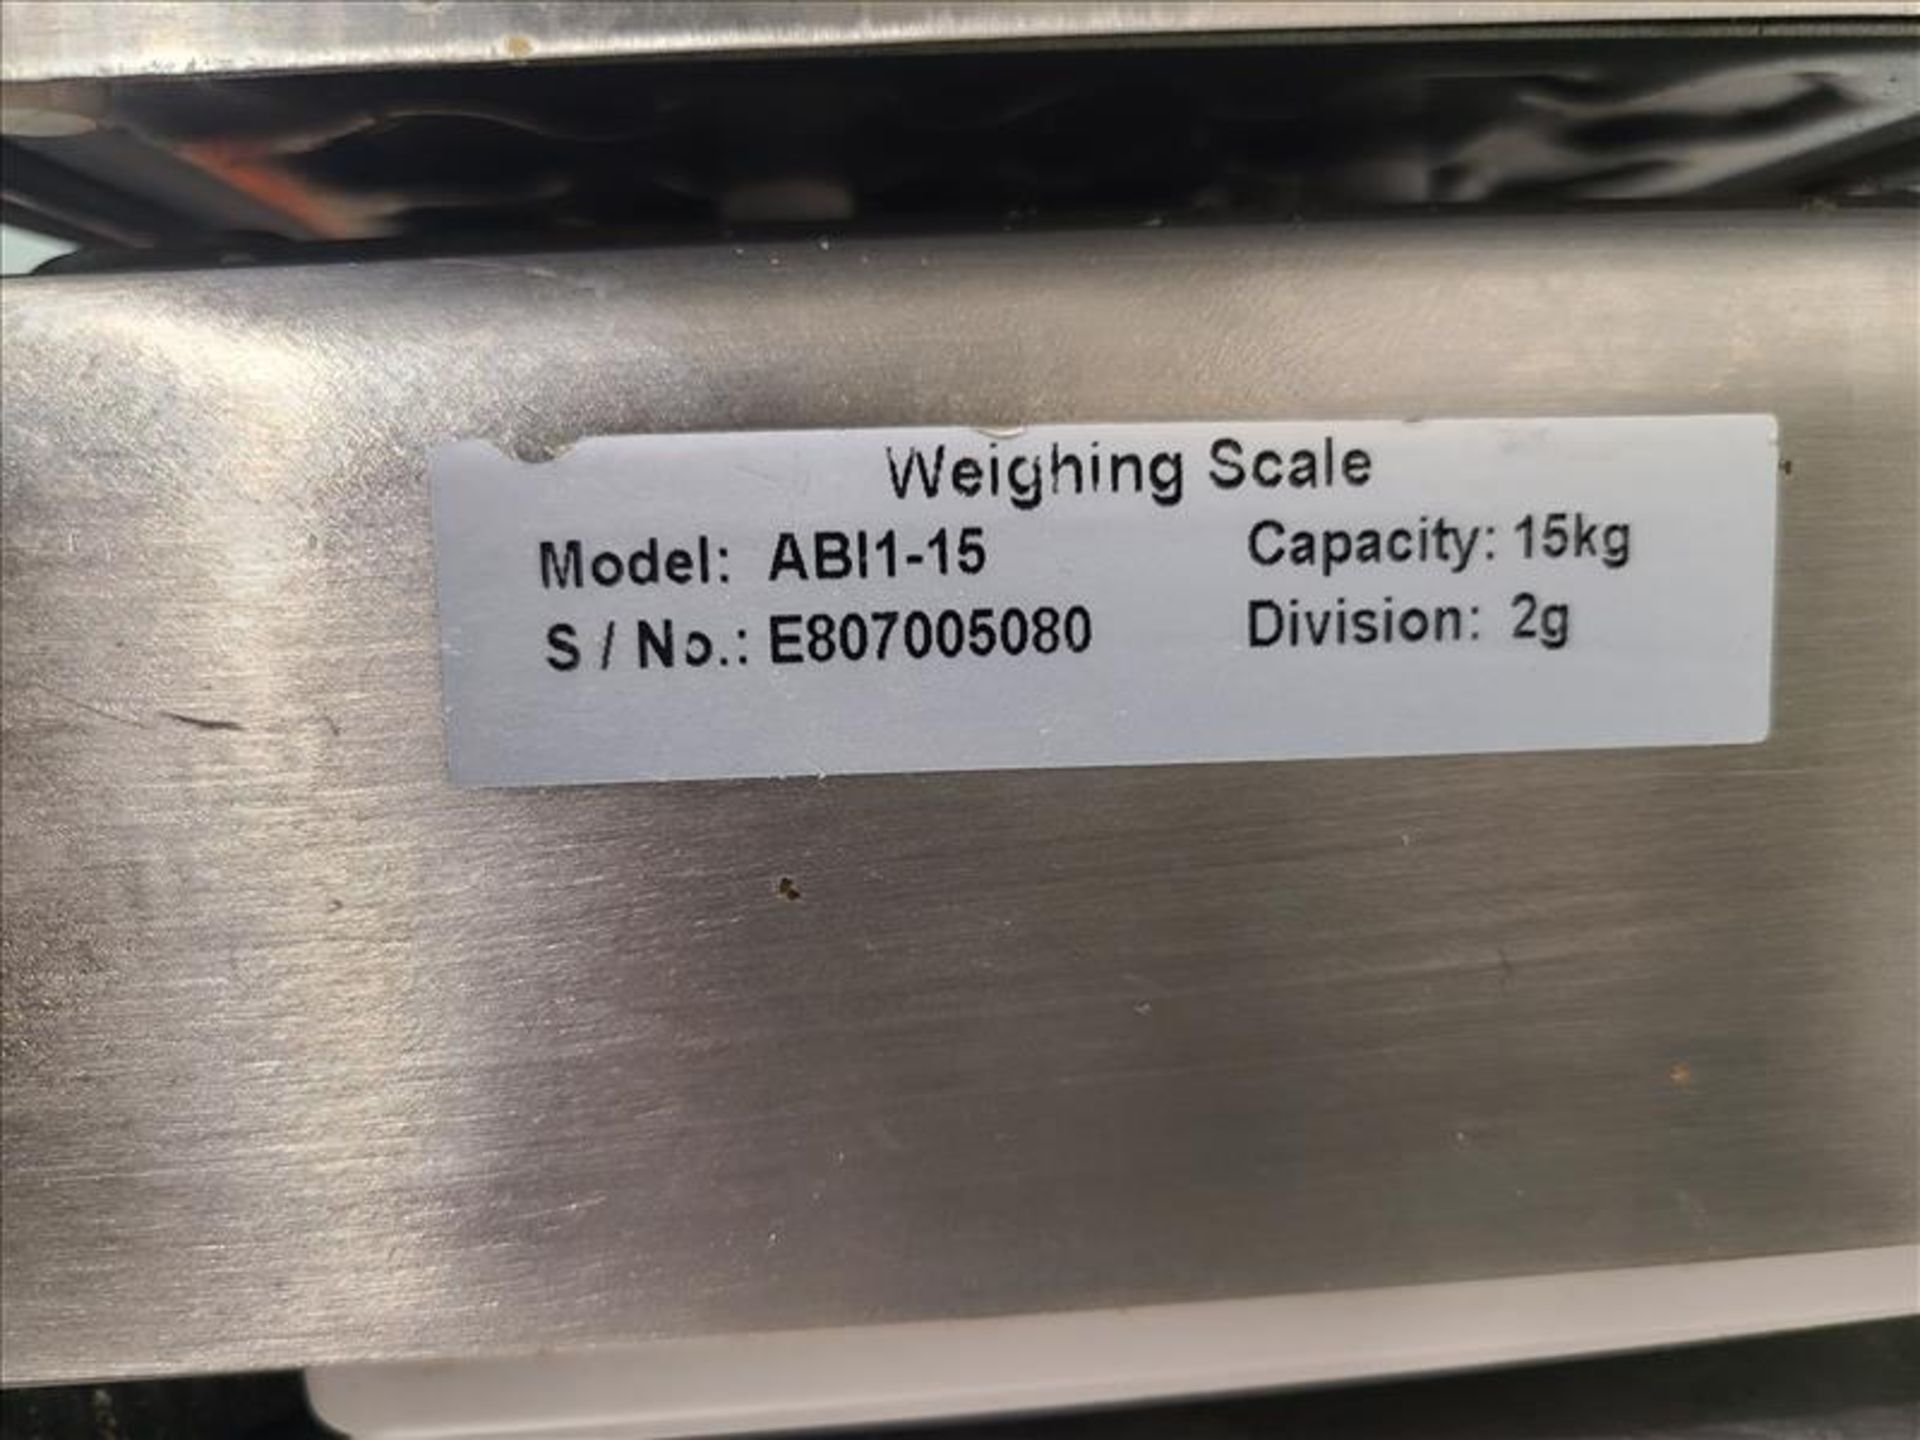 ABI Systems Digital Weighing Scale, mod. ABI1-15, ser. no. E807005080, 15 kg. capacity [Loc. - Image 2 of 2